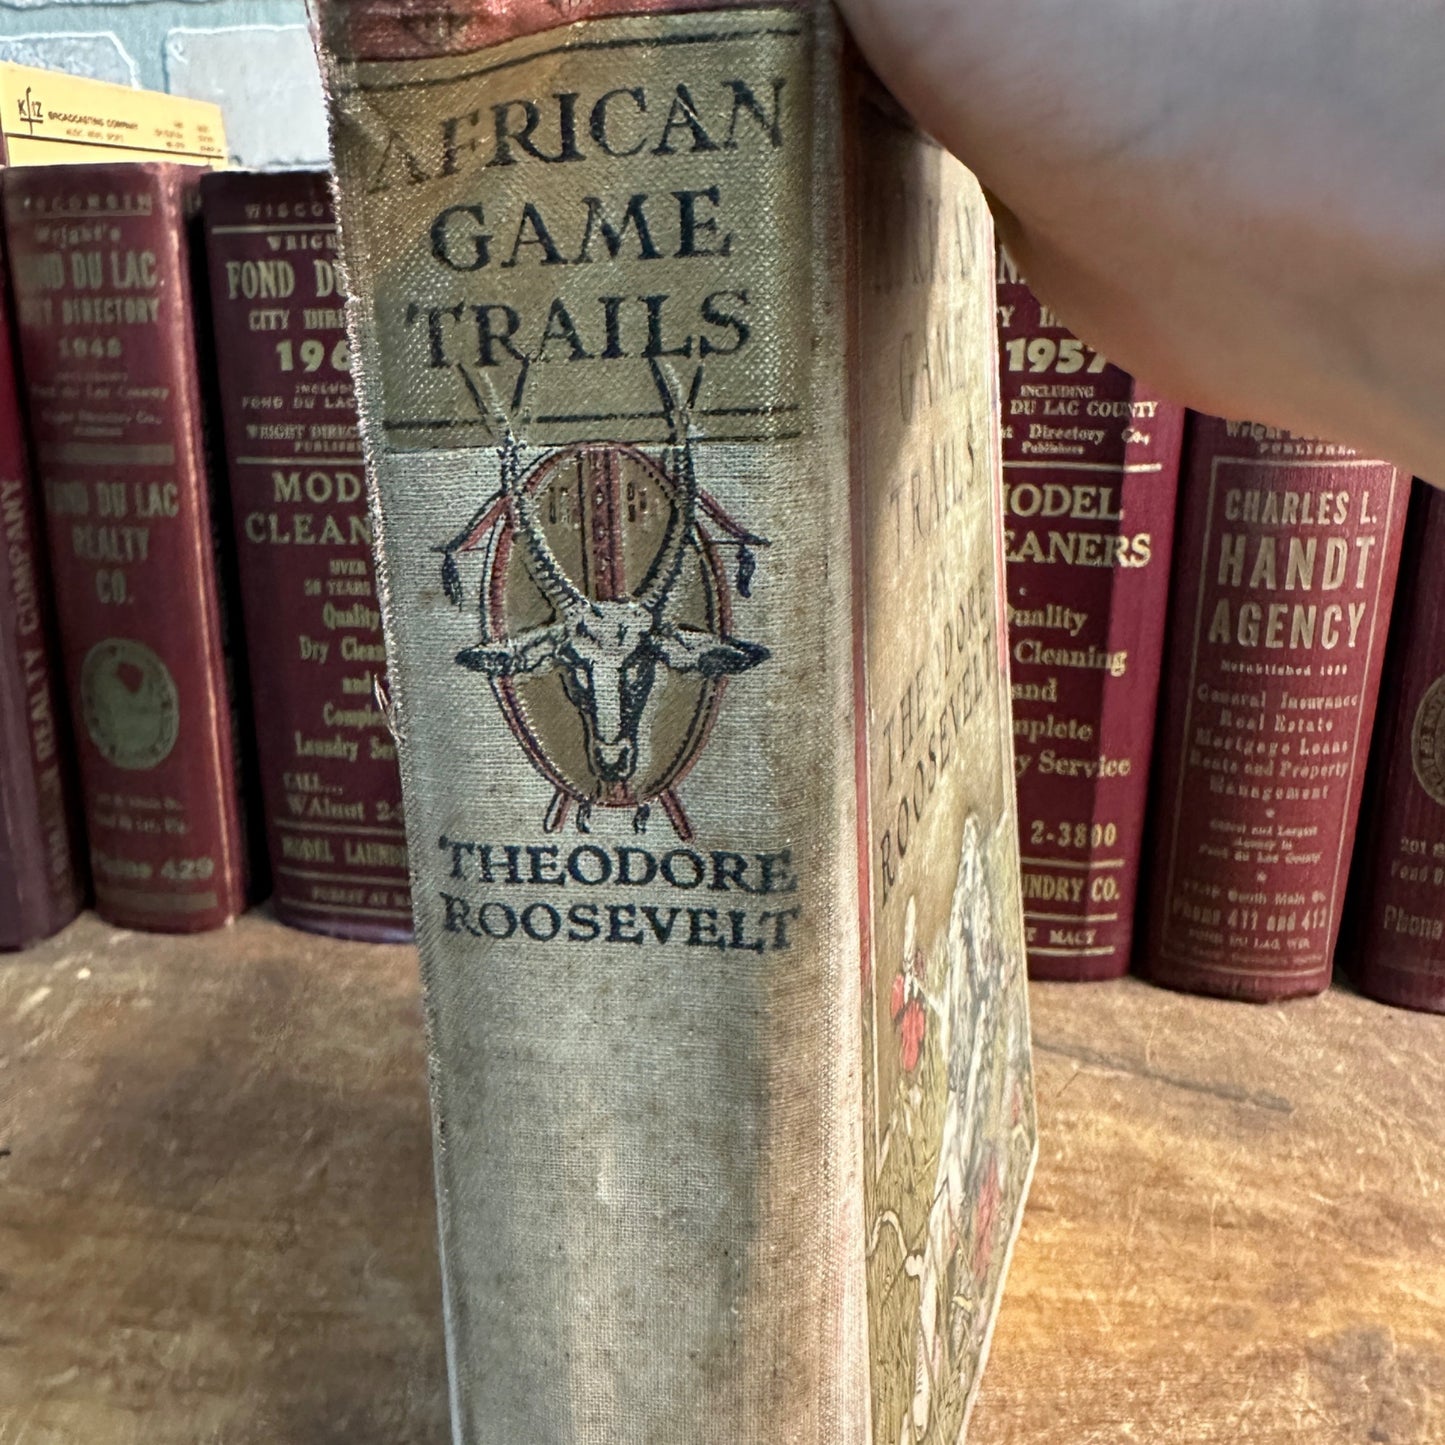 AFRICAN GAME TRAILS THEODORE ROOSEVELT 1910 BOOK SYNDICATE PUBLISHING